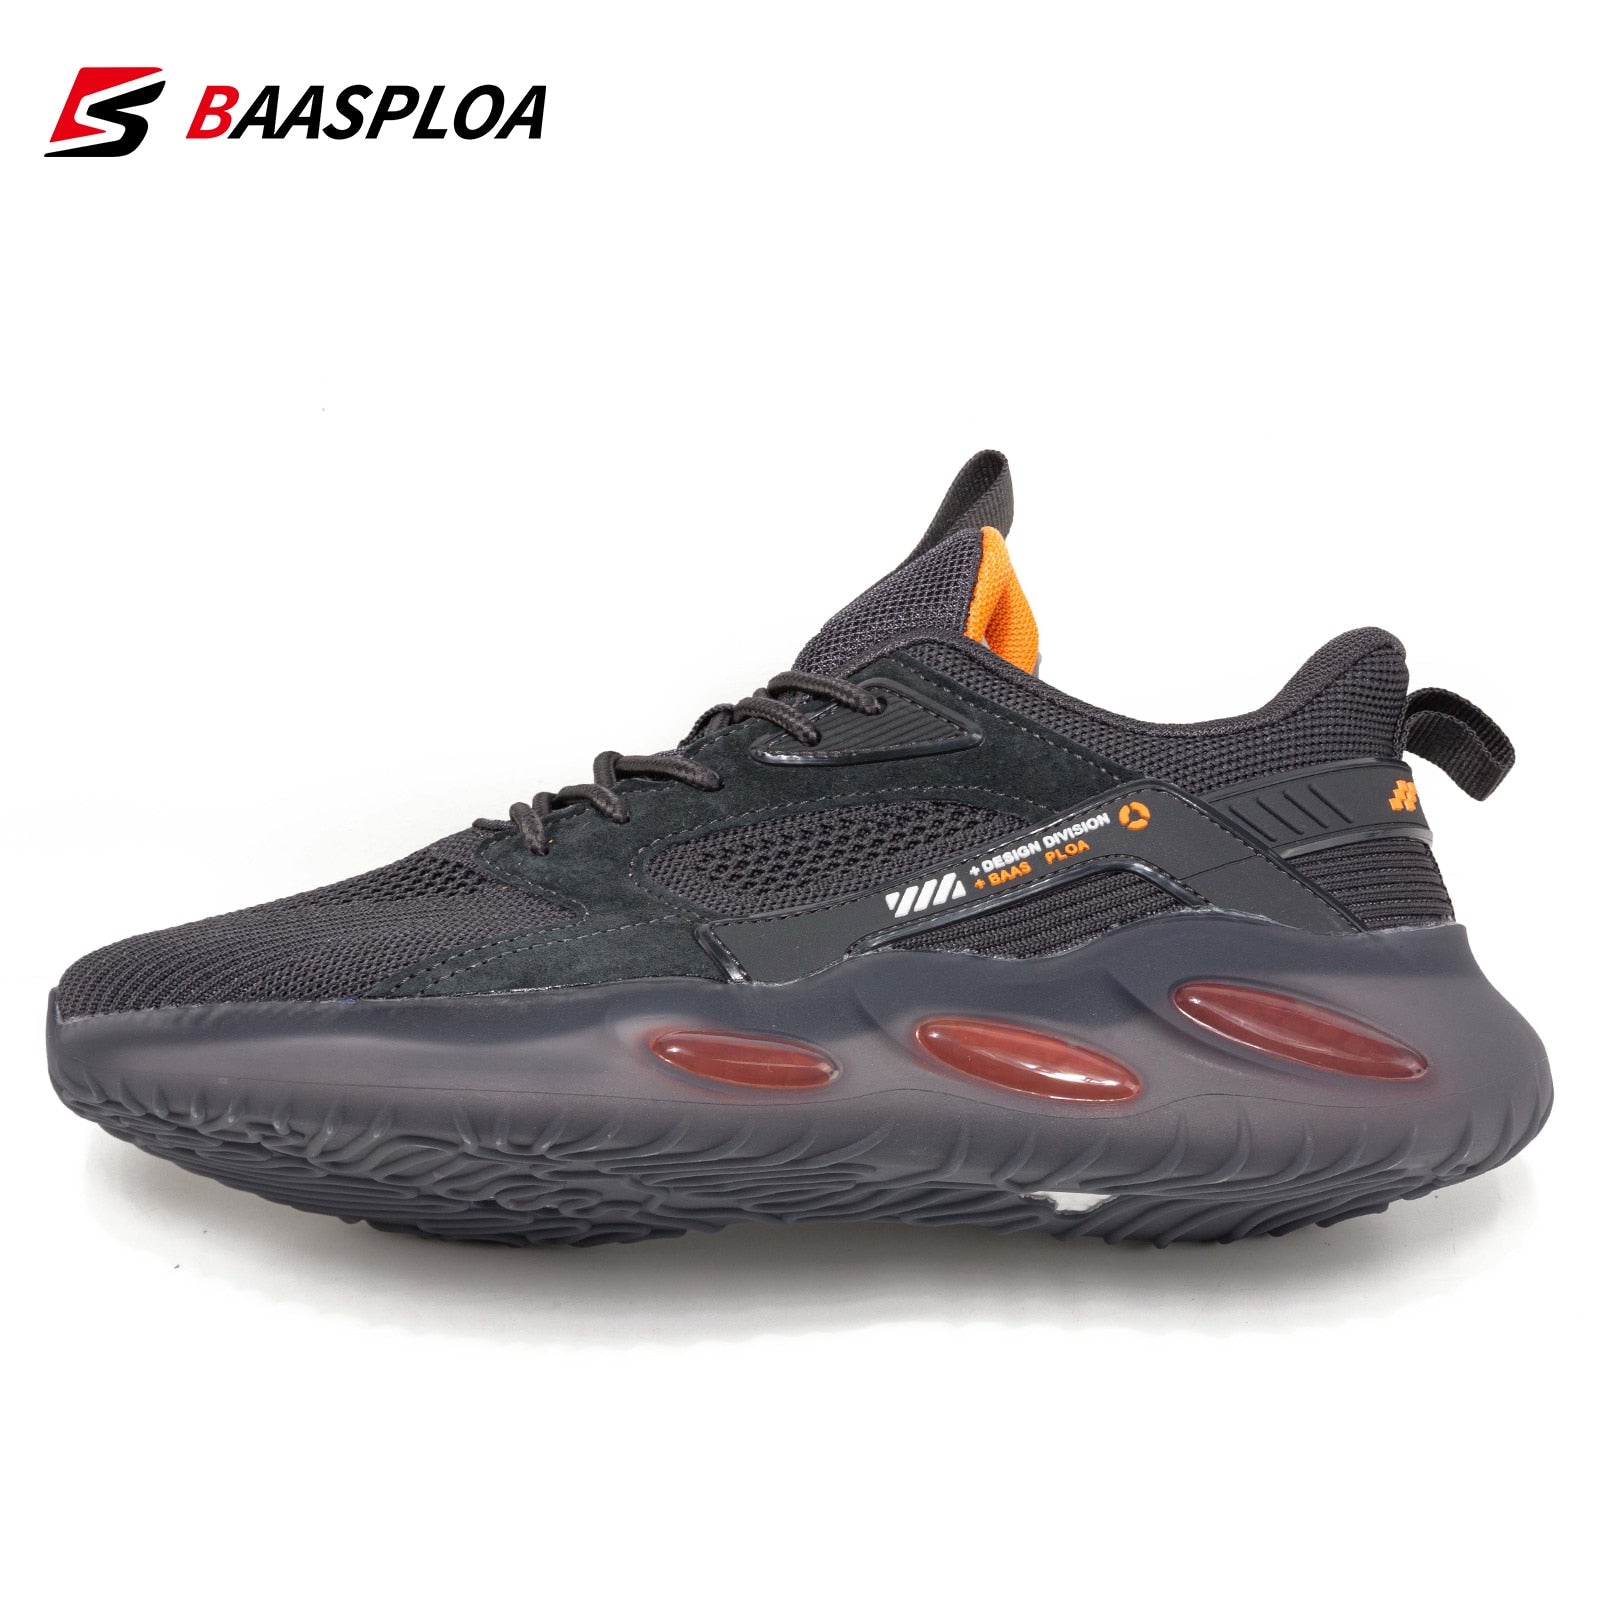 Men's Sneakers Comfortable Breathable Lightweight Running Shoes Anti-slip Shock-absorbing Mesh Casual Walking Shoes The Clothing Company Sydney